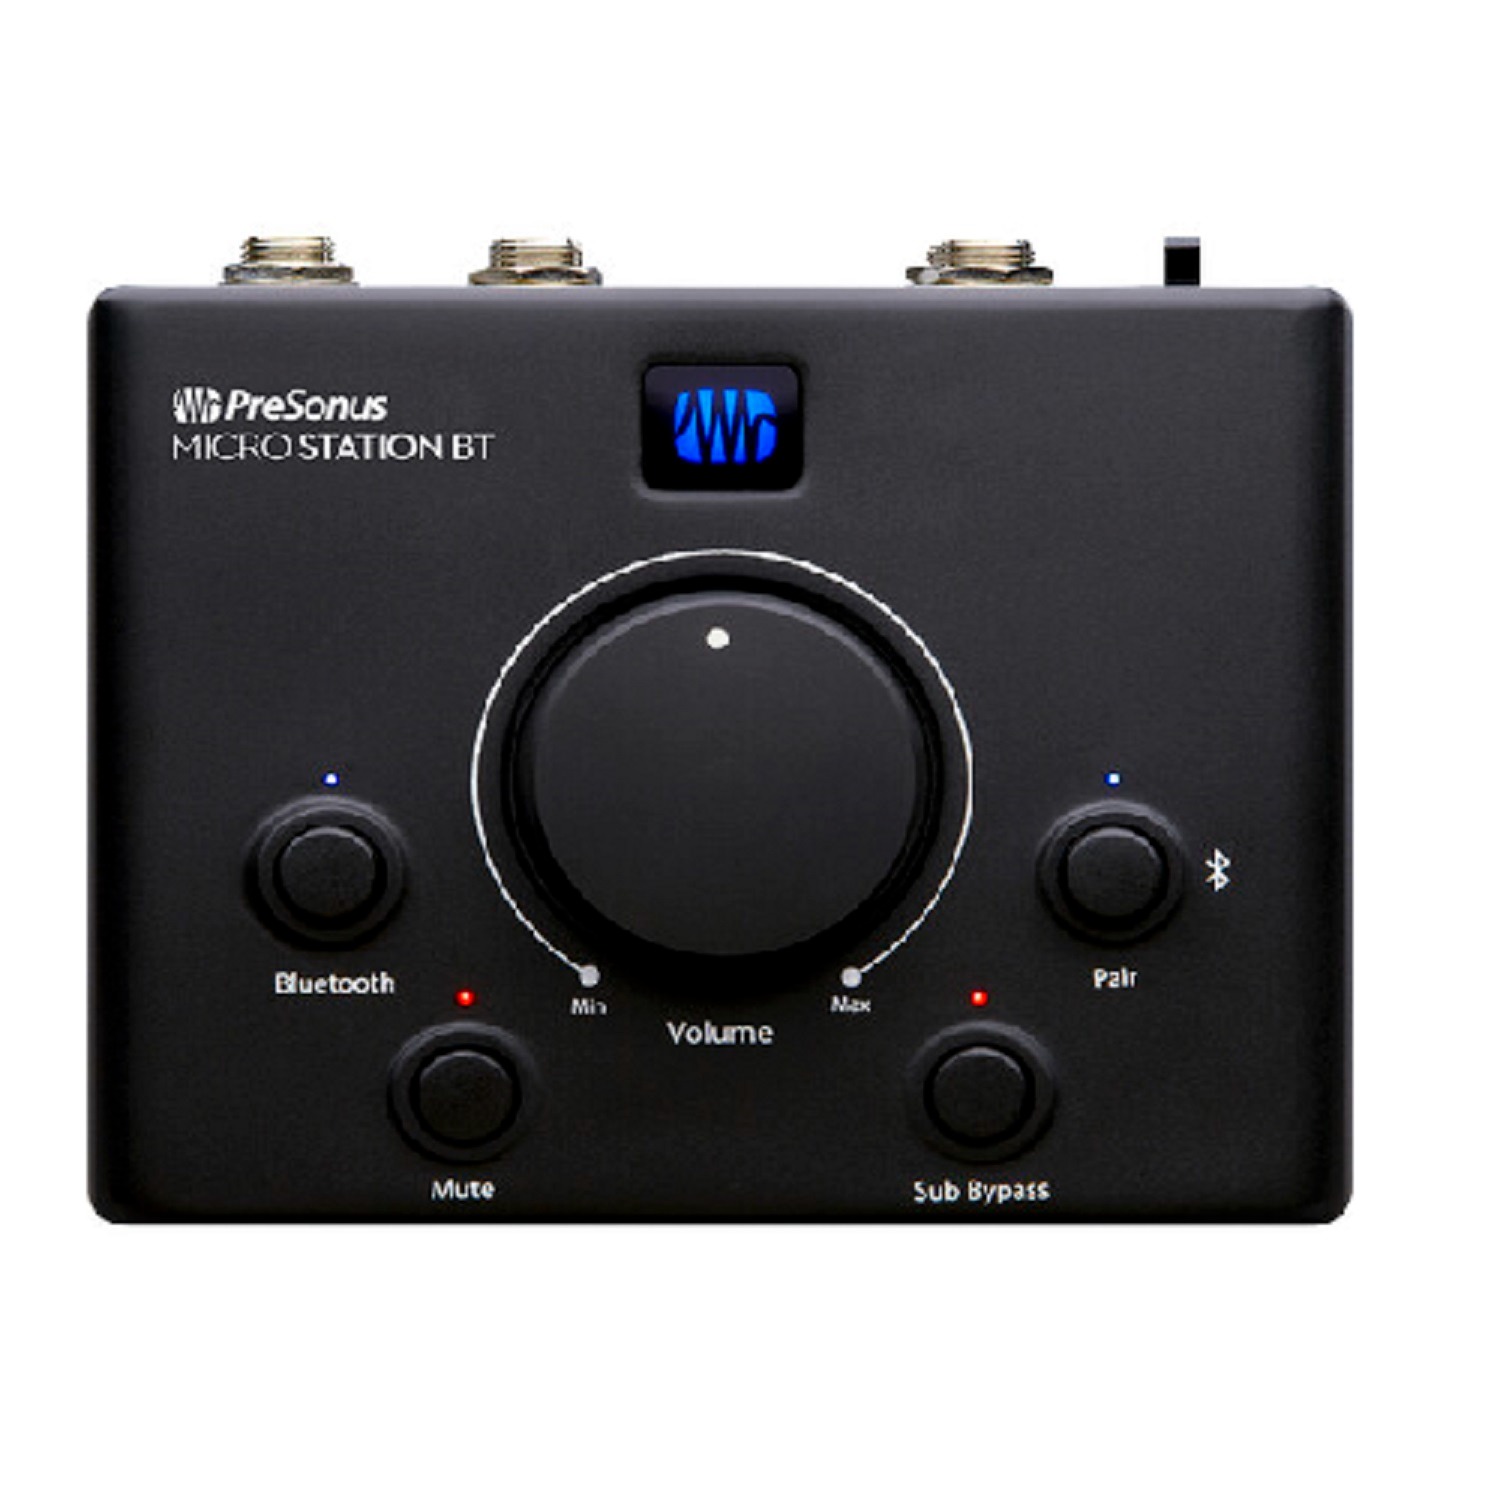 2.1 Monitor Controller with Bluetooth Connectivity, PreSonus MicroStation BT